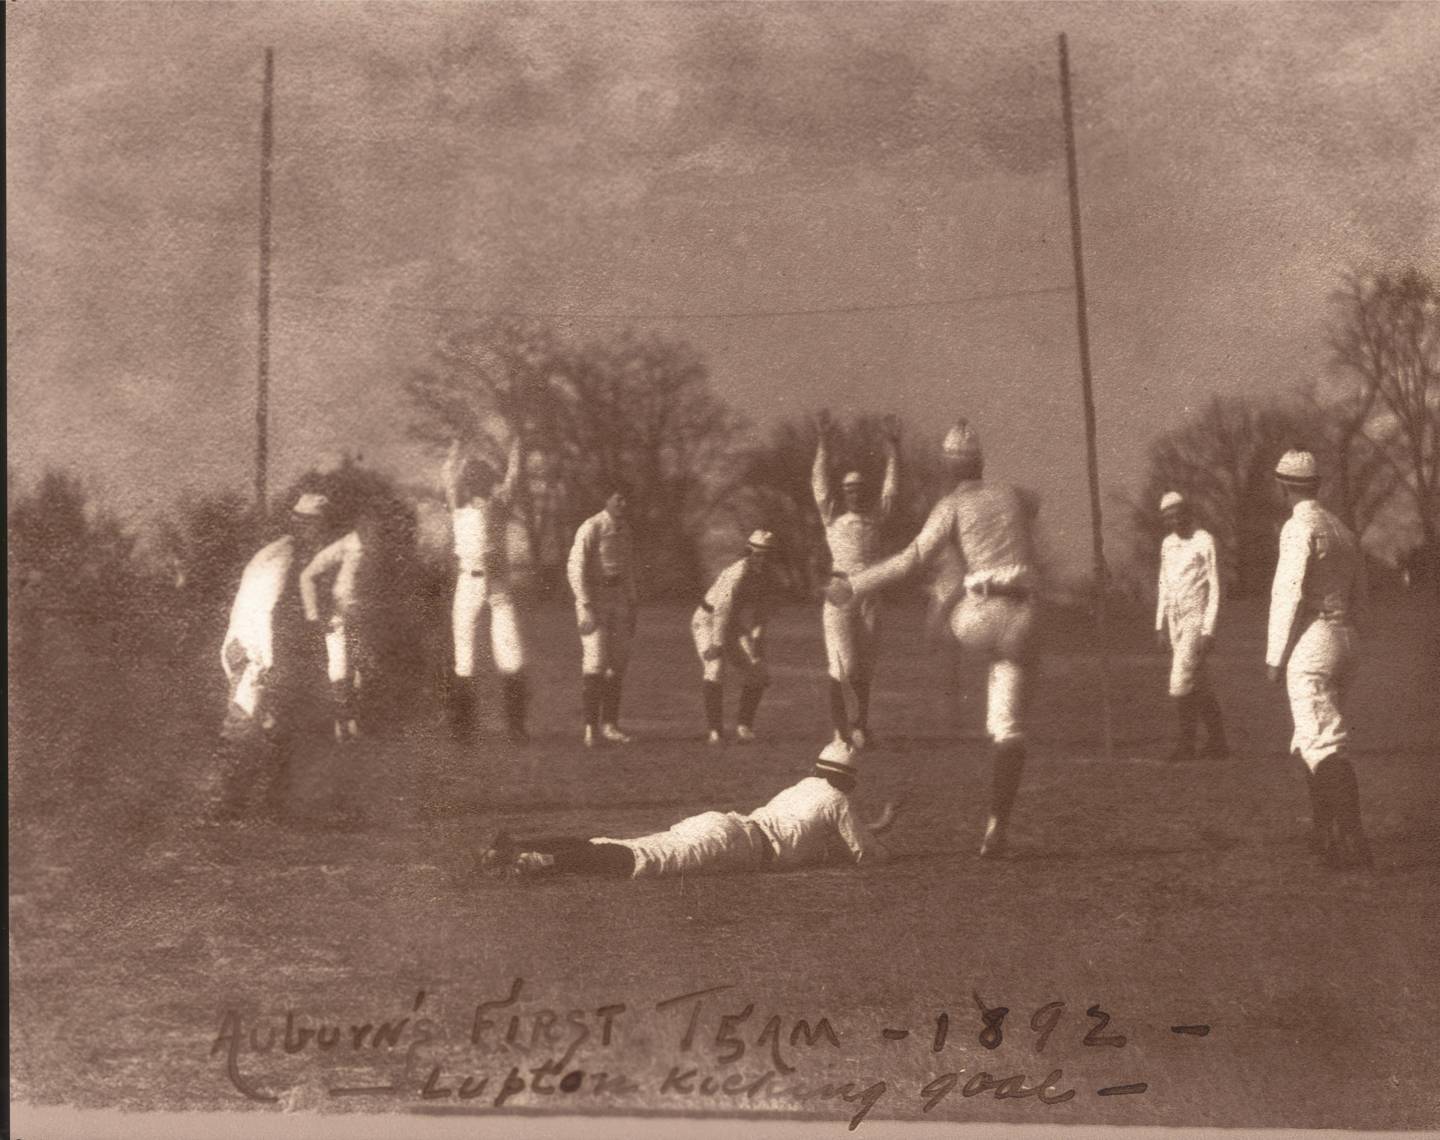 Old fashioned photo of men playing football